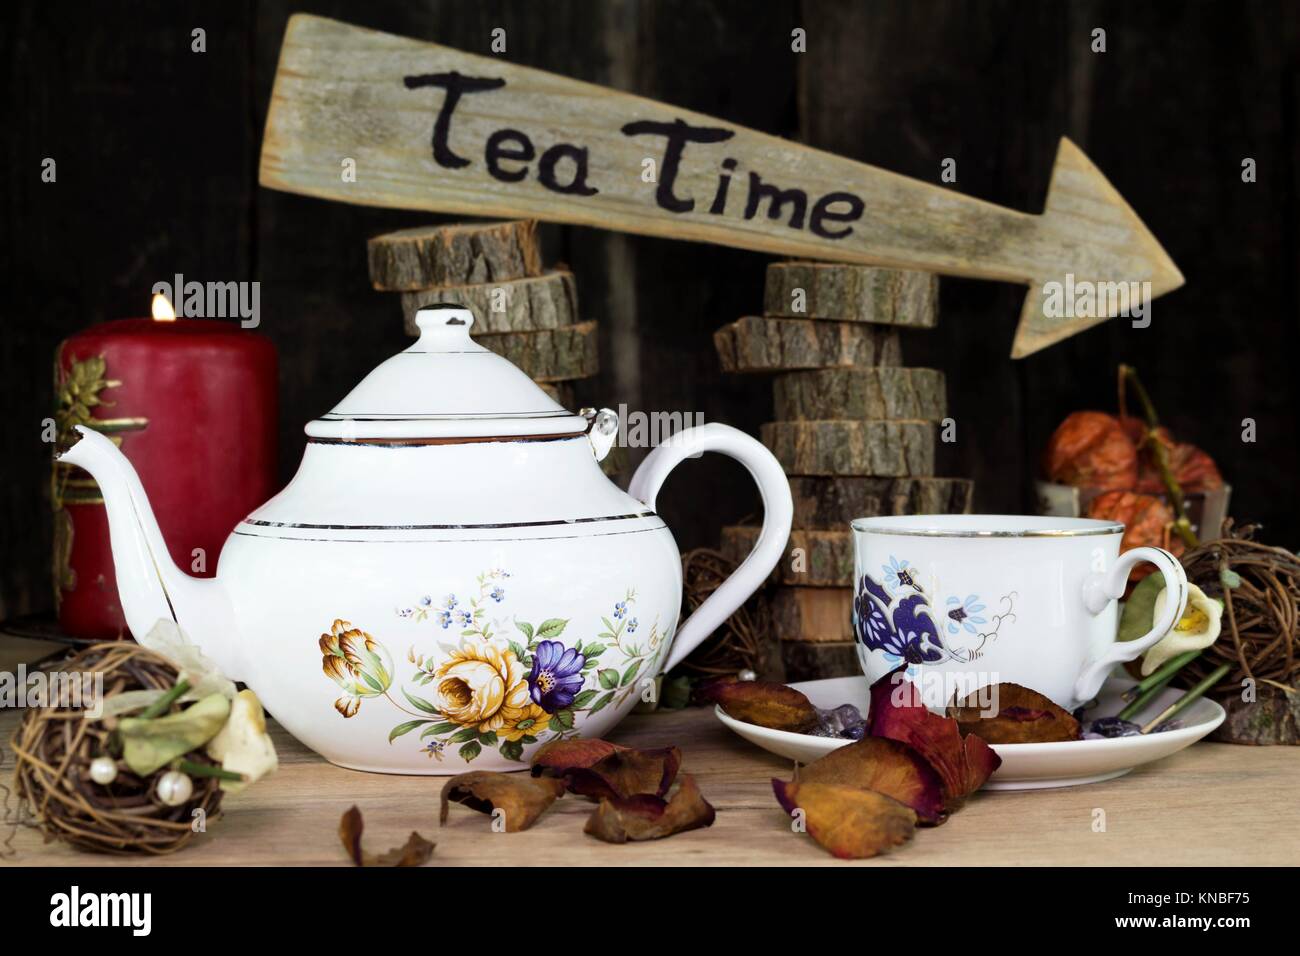 Cup of Tea and Teapot On Wooden Table. Arrow Sign With Text, Tea Time Written On It in The Background. Stock Photo